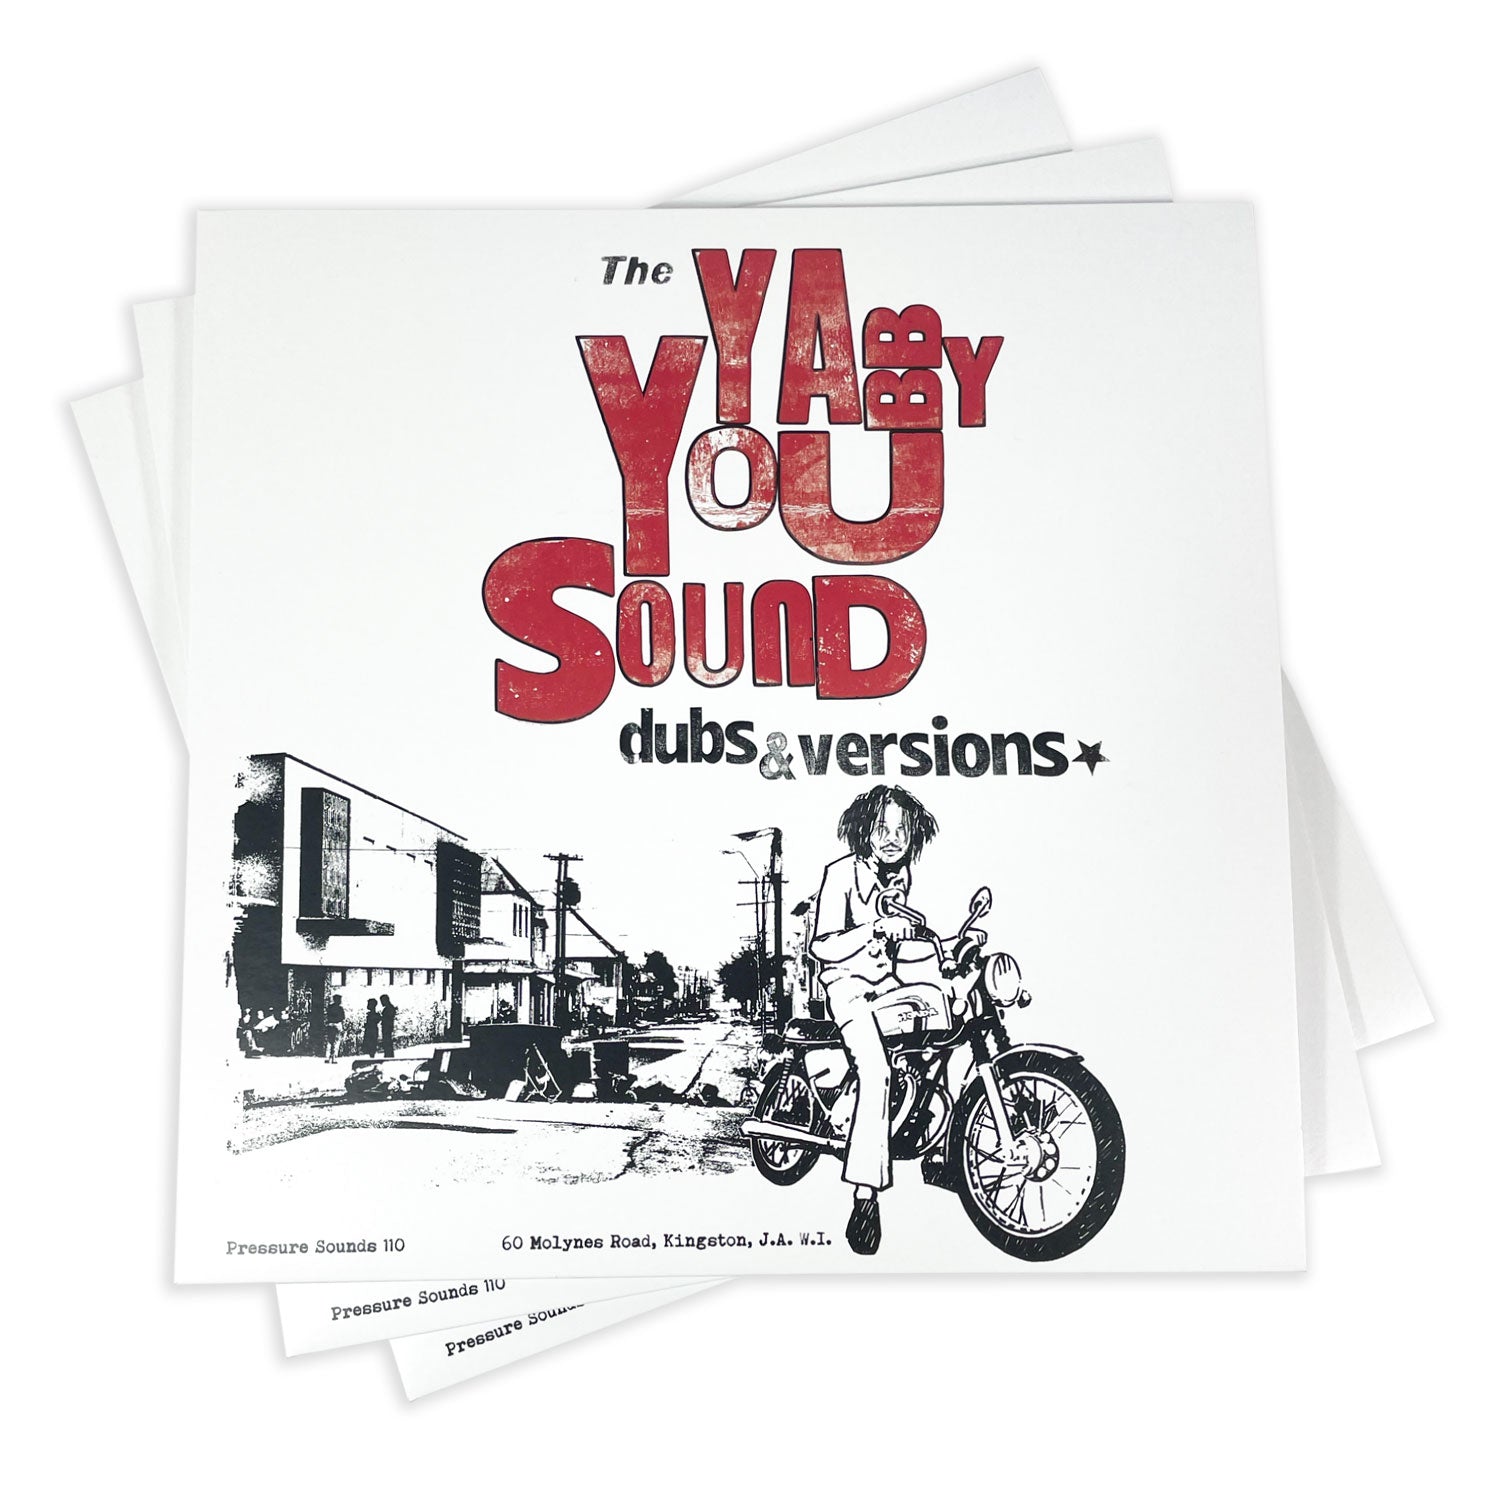 Yabby You & The Prophets – The Yabby You Sound (Dubs & Versions)